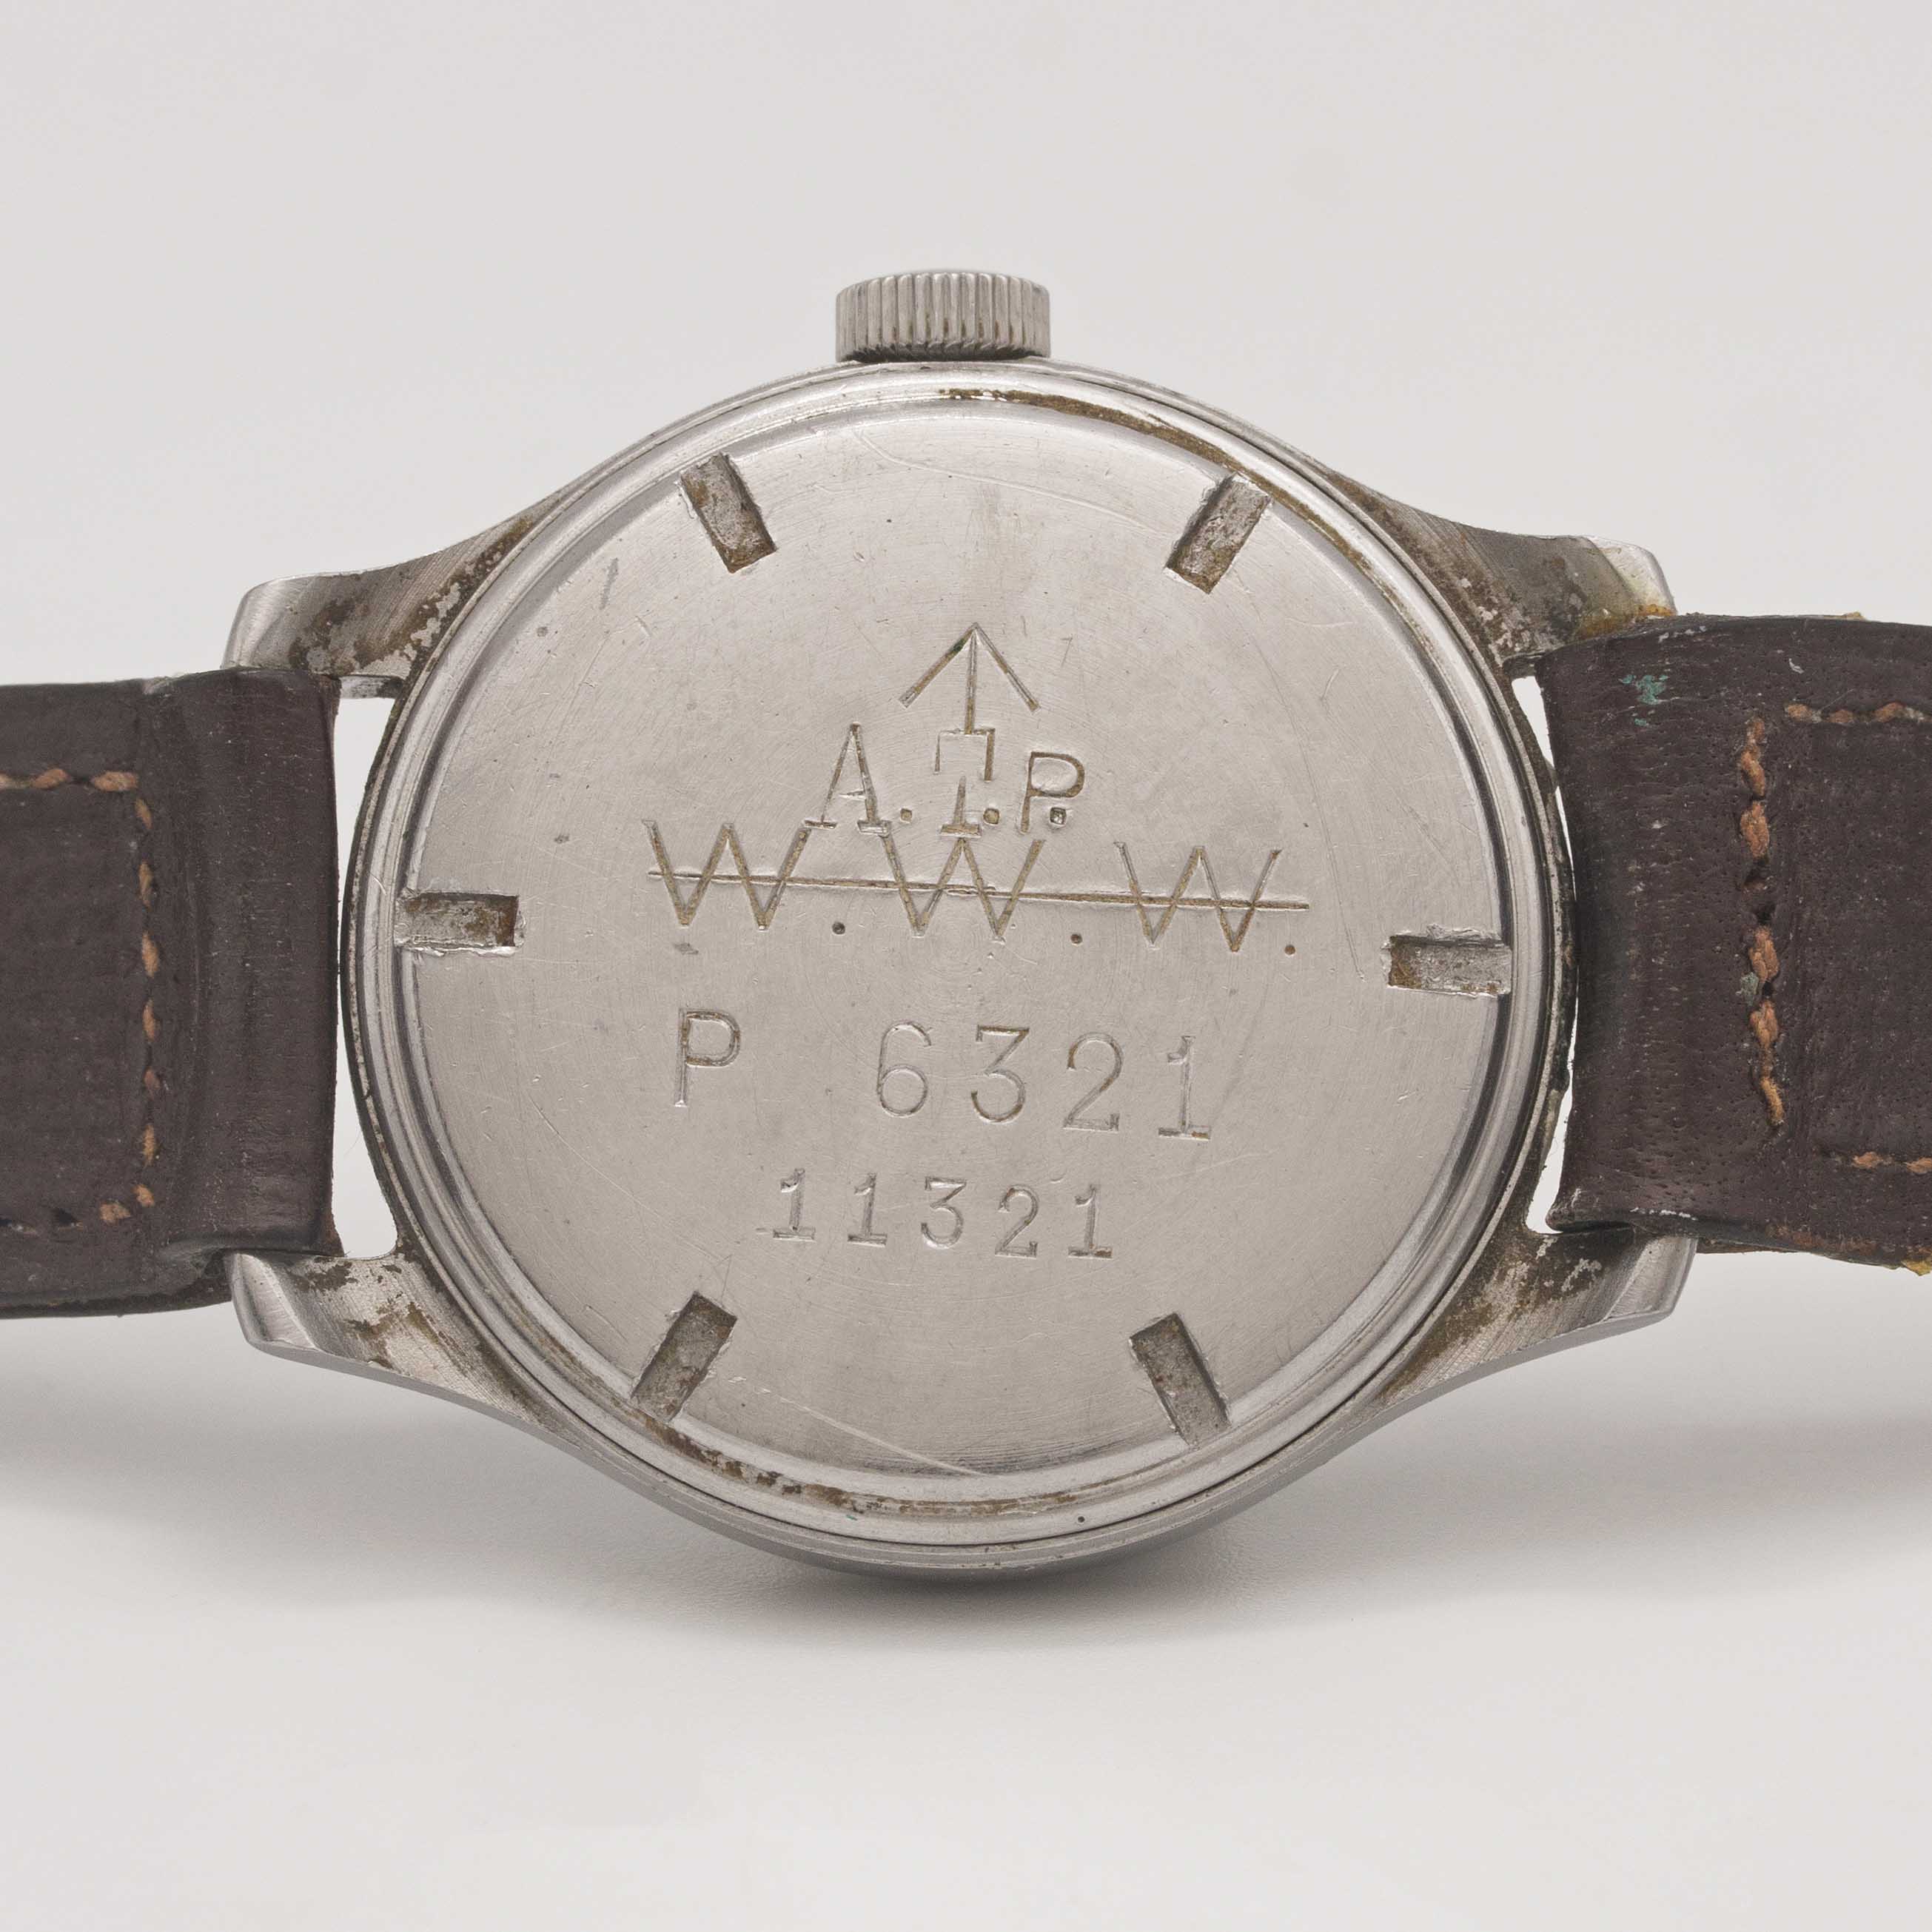 A GENTLEMAN'S STAINLESS STEEL BRITISH MILITARY CYMA W.W.W. WRIST WATCH CIRCA 1945, PART OF THE " - Image 6 of 9